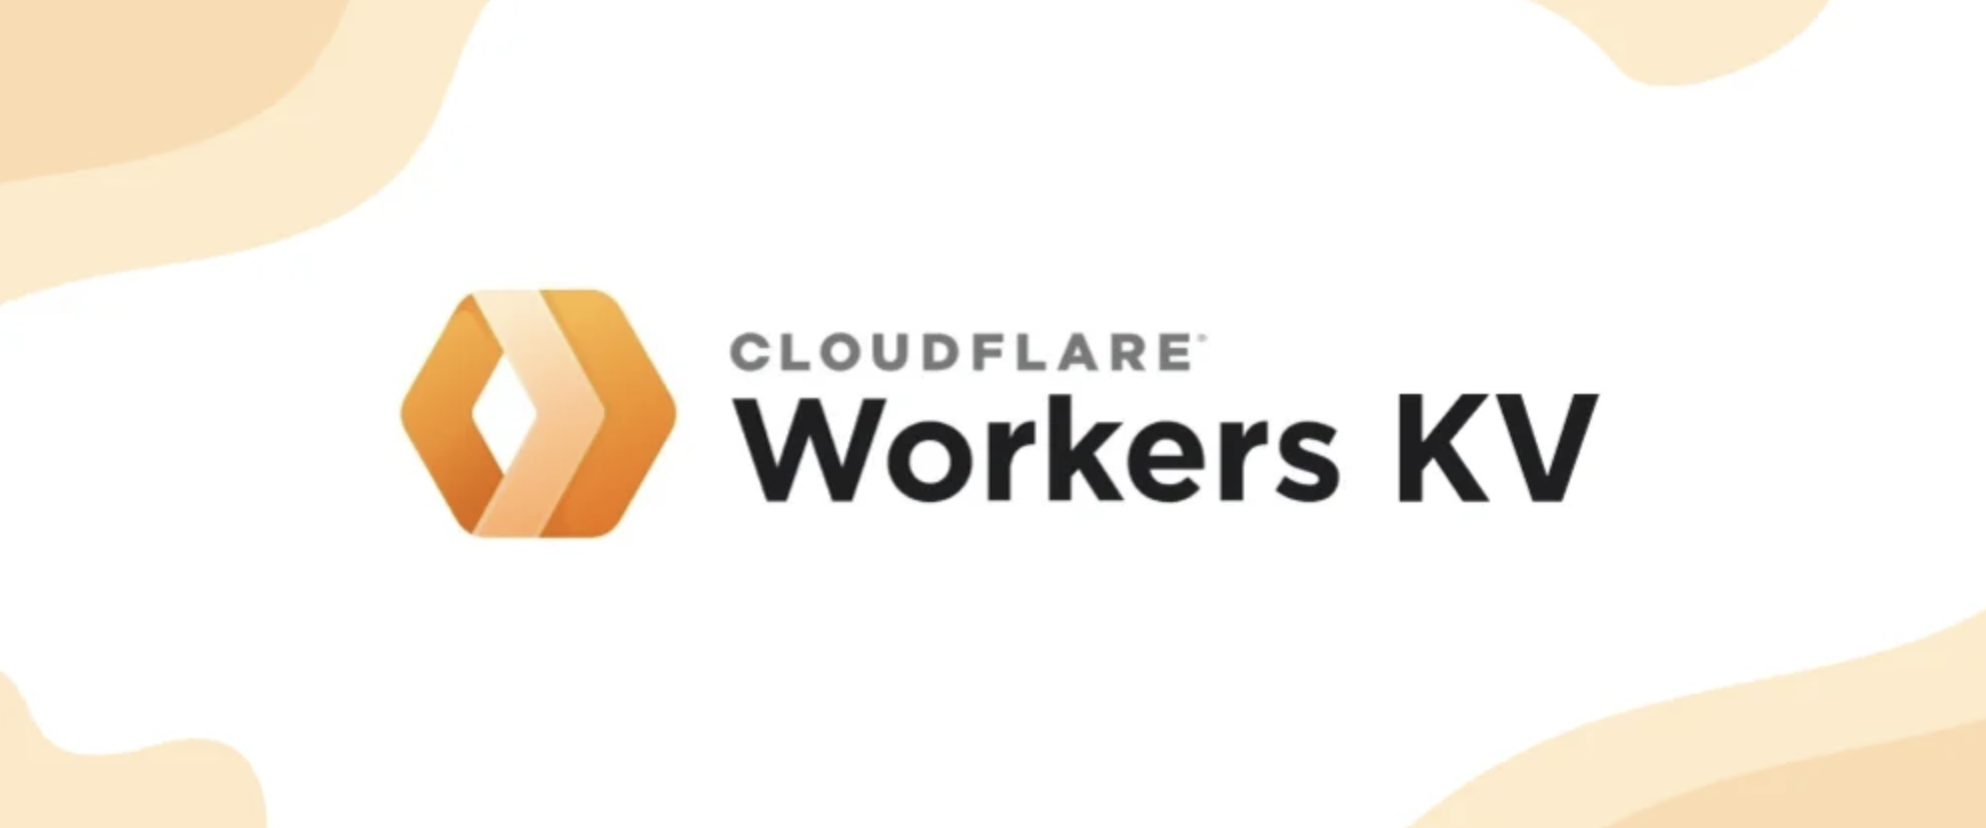 Cloudflare Workers KV